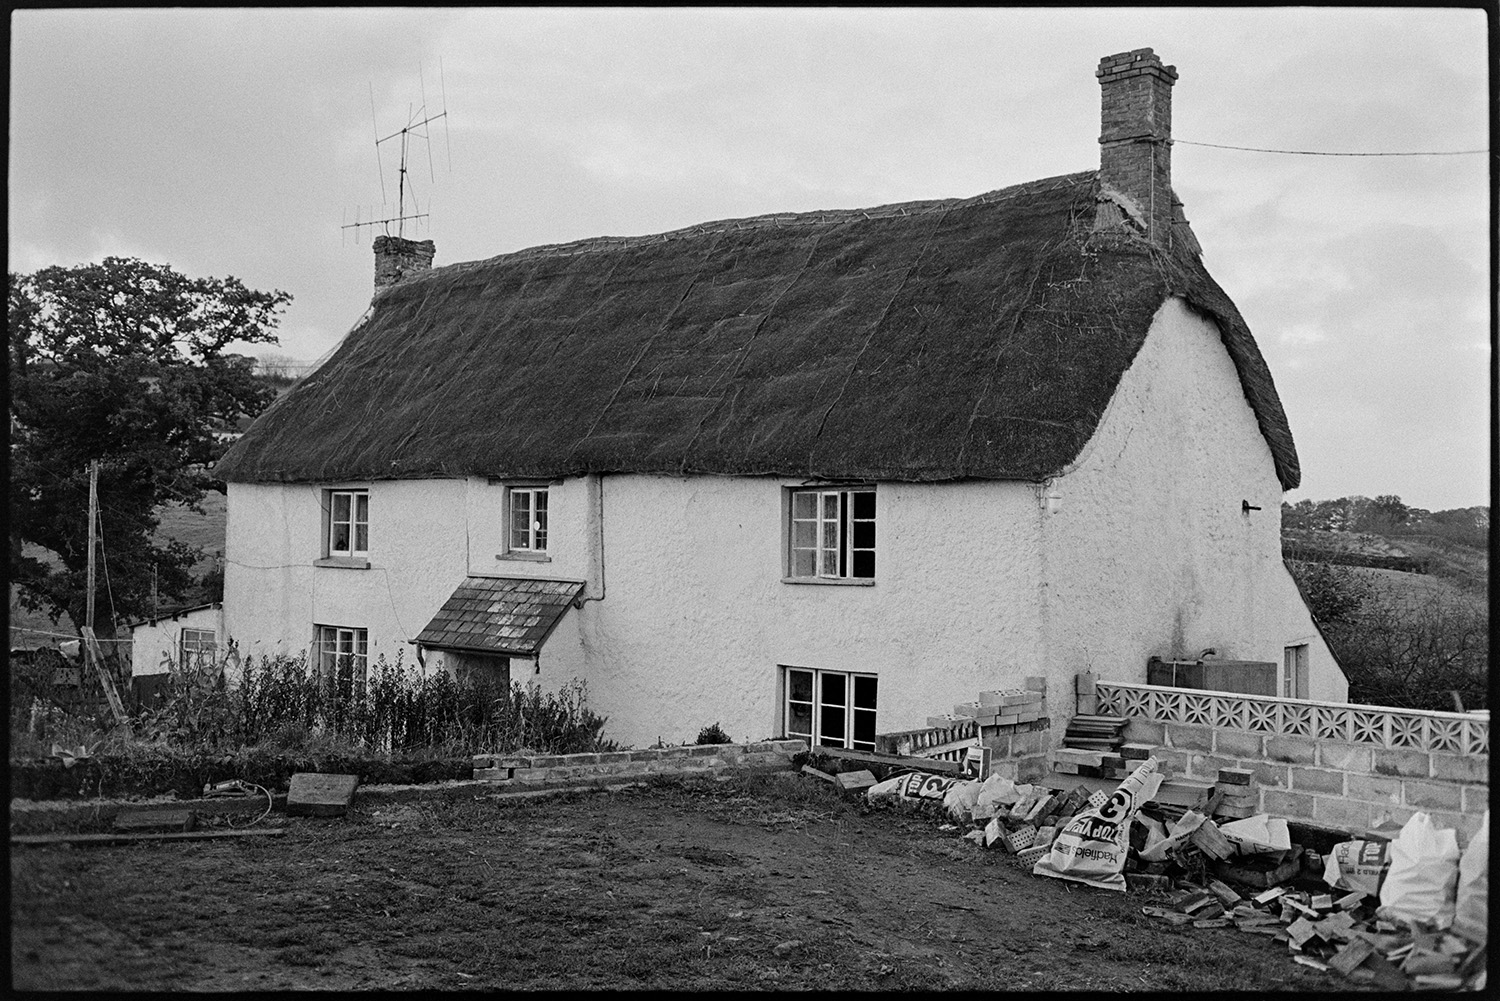 Cob and thatch farmhouse. 
[The cob and thatch farmhouse at Hallcourt, Petrockstowe. Various construction materials and a newly built wall can be seen by the side of the house.]